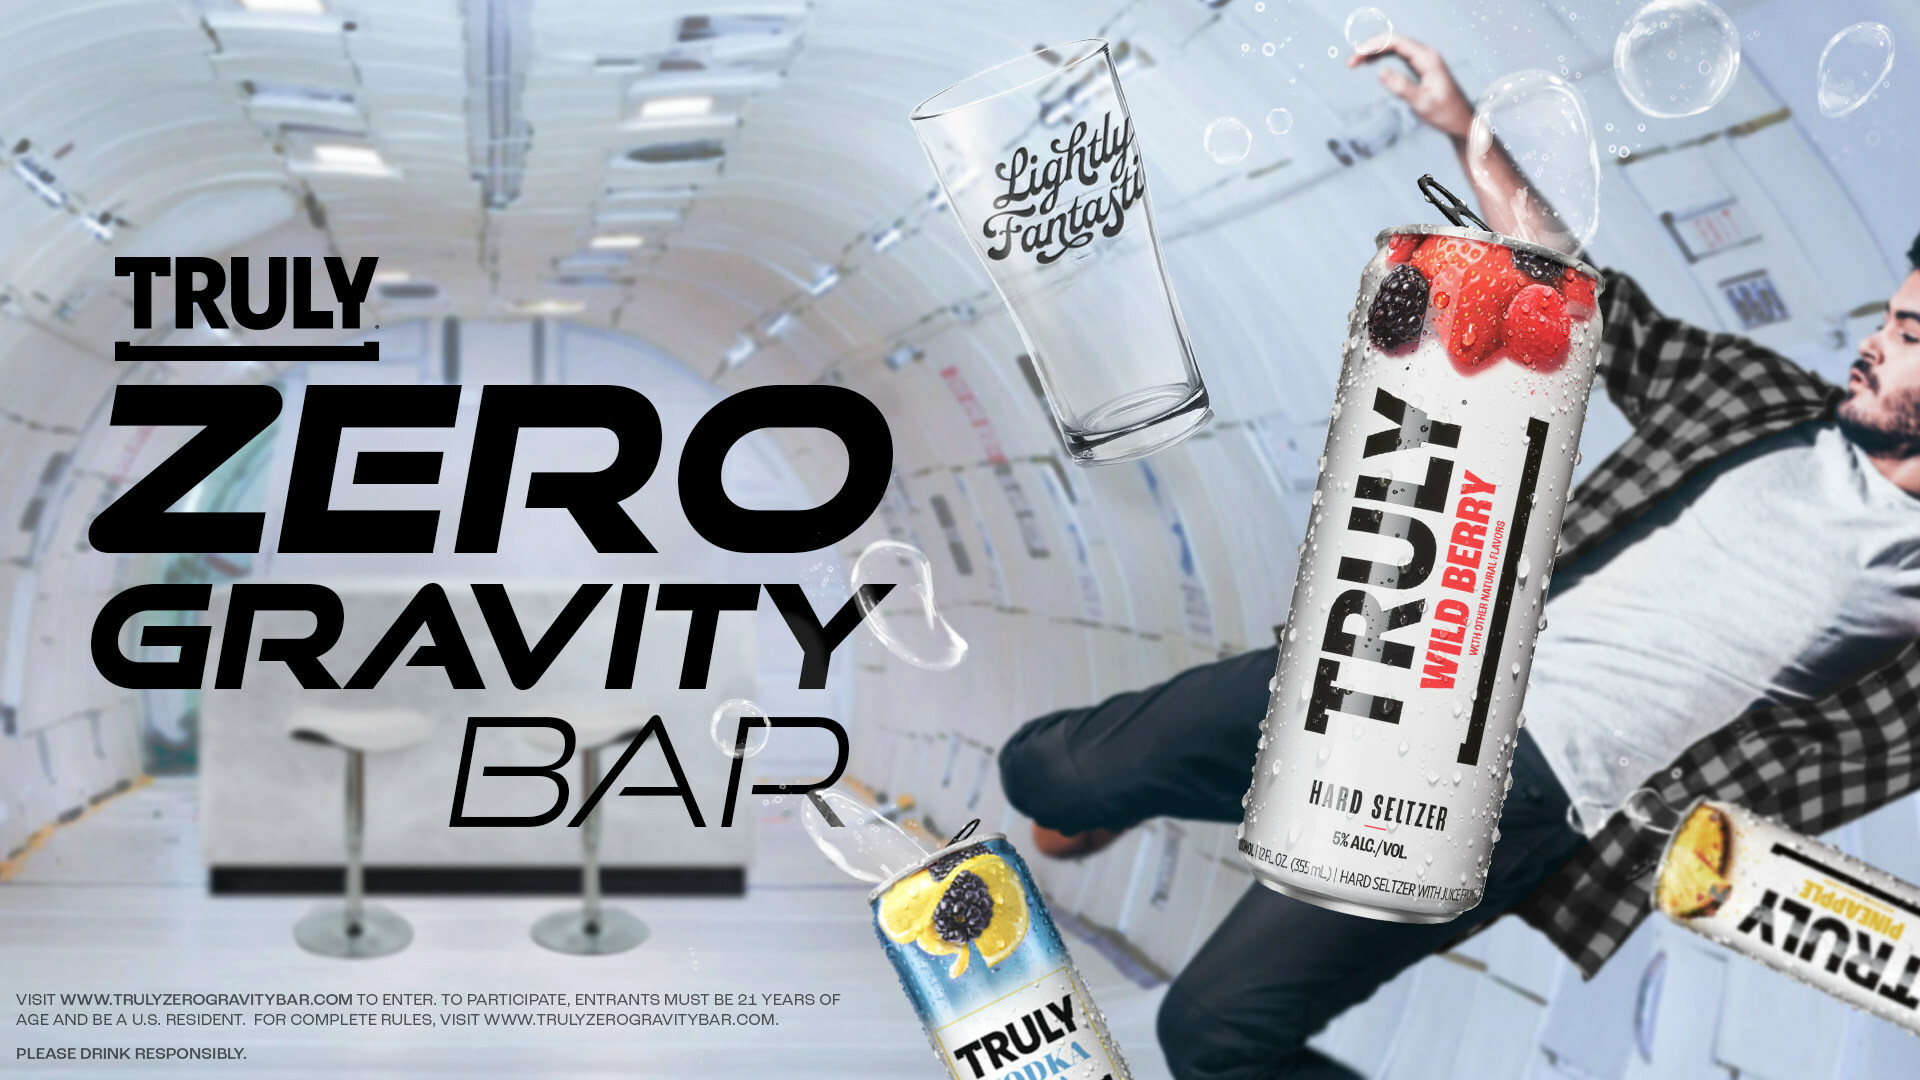 Truly Zero Gravity Bar and Flight Floating Cans and Participant